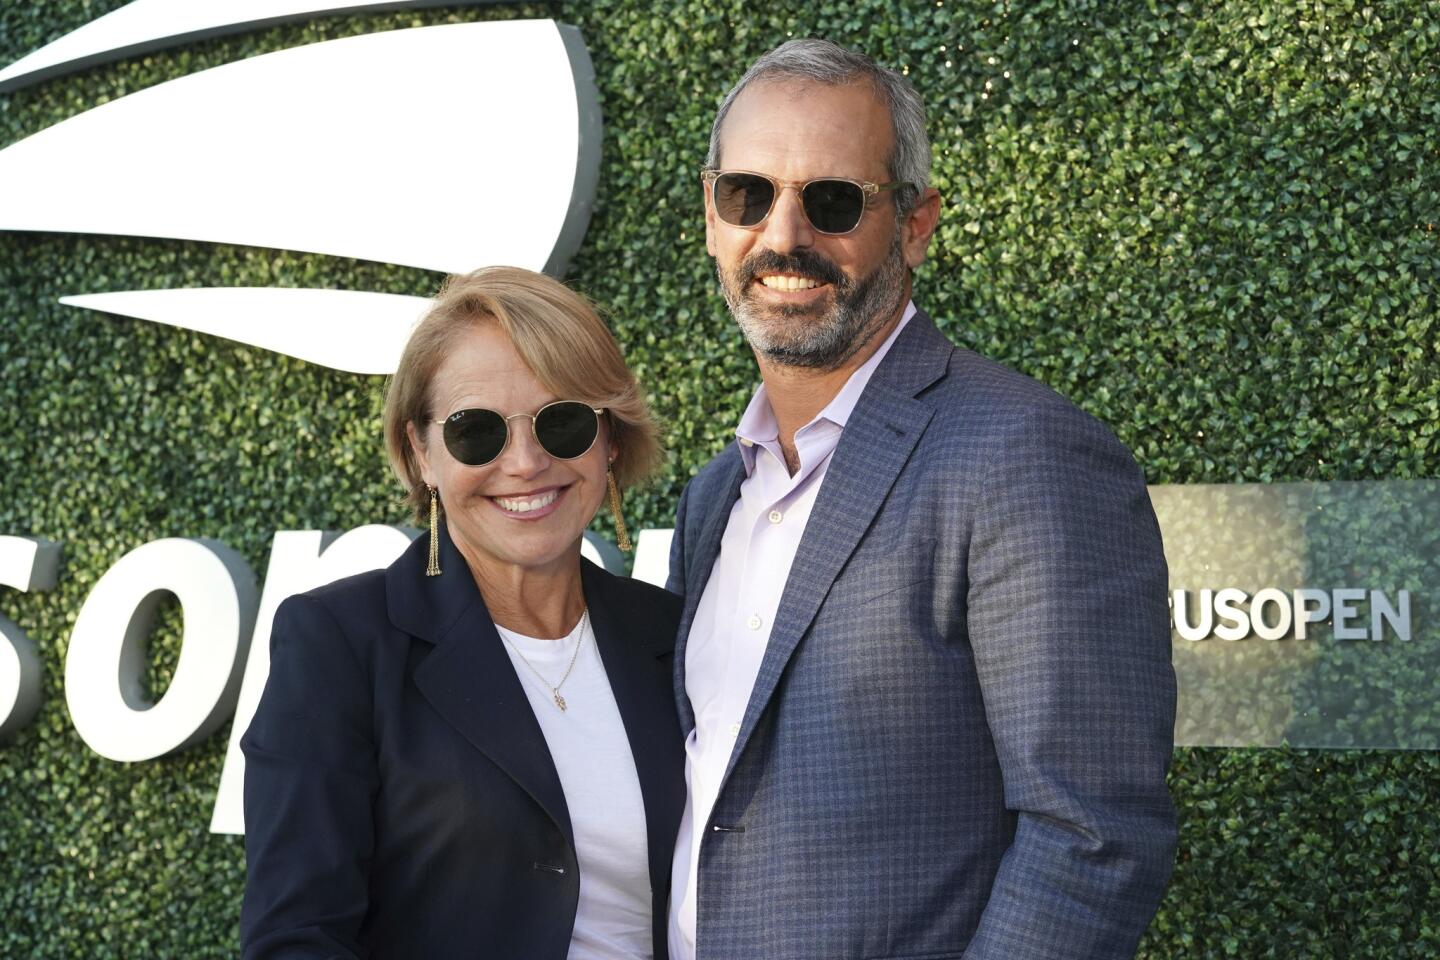 Katie Couric, left, and John Molner attend the quarterfinals of the U.S. Open tennis championships on Tuesday, Sept. 3, 2019, in New York.